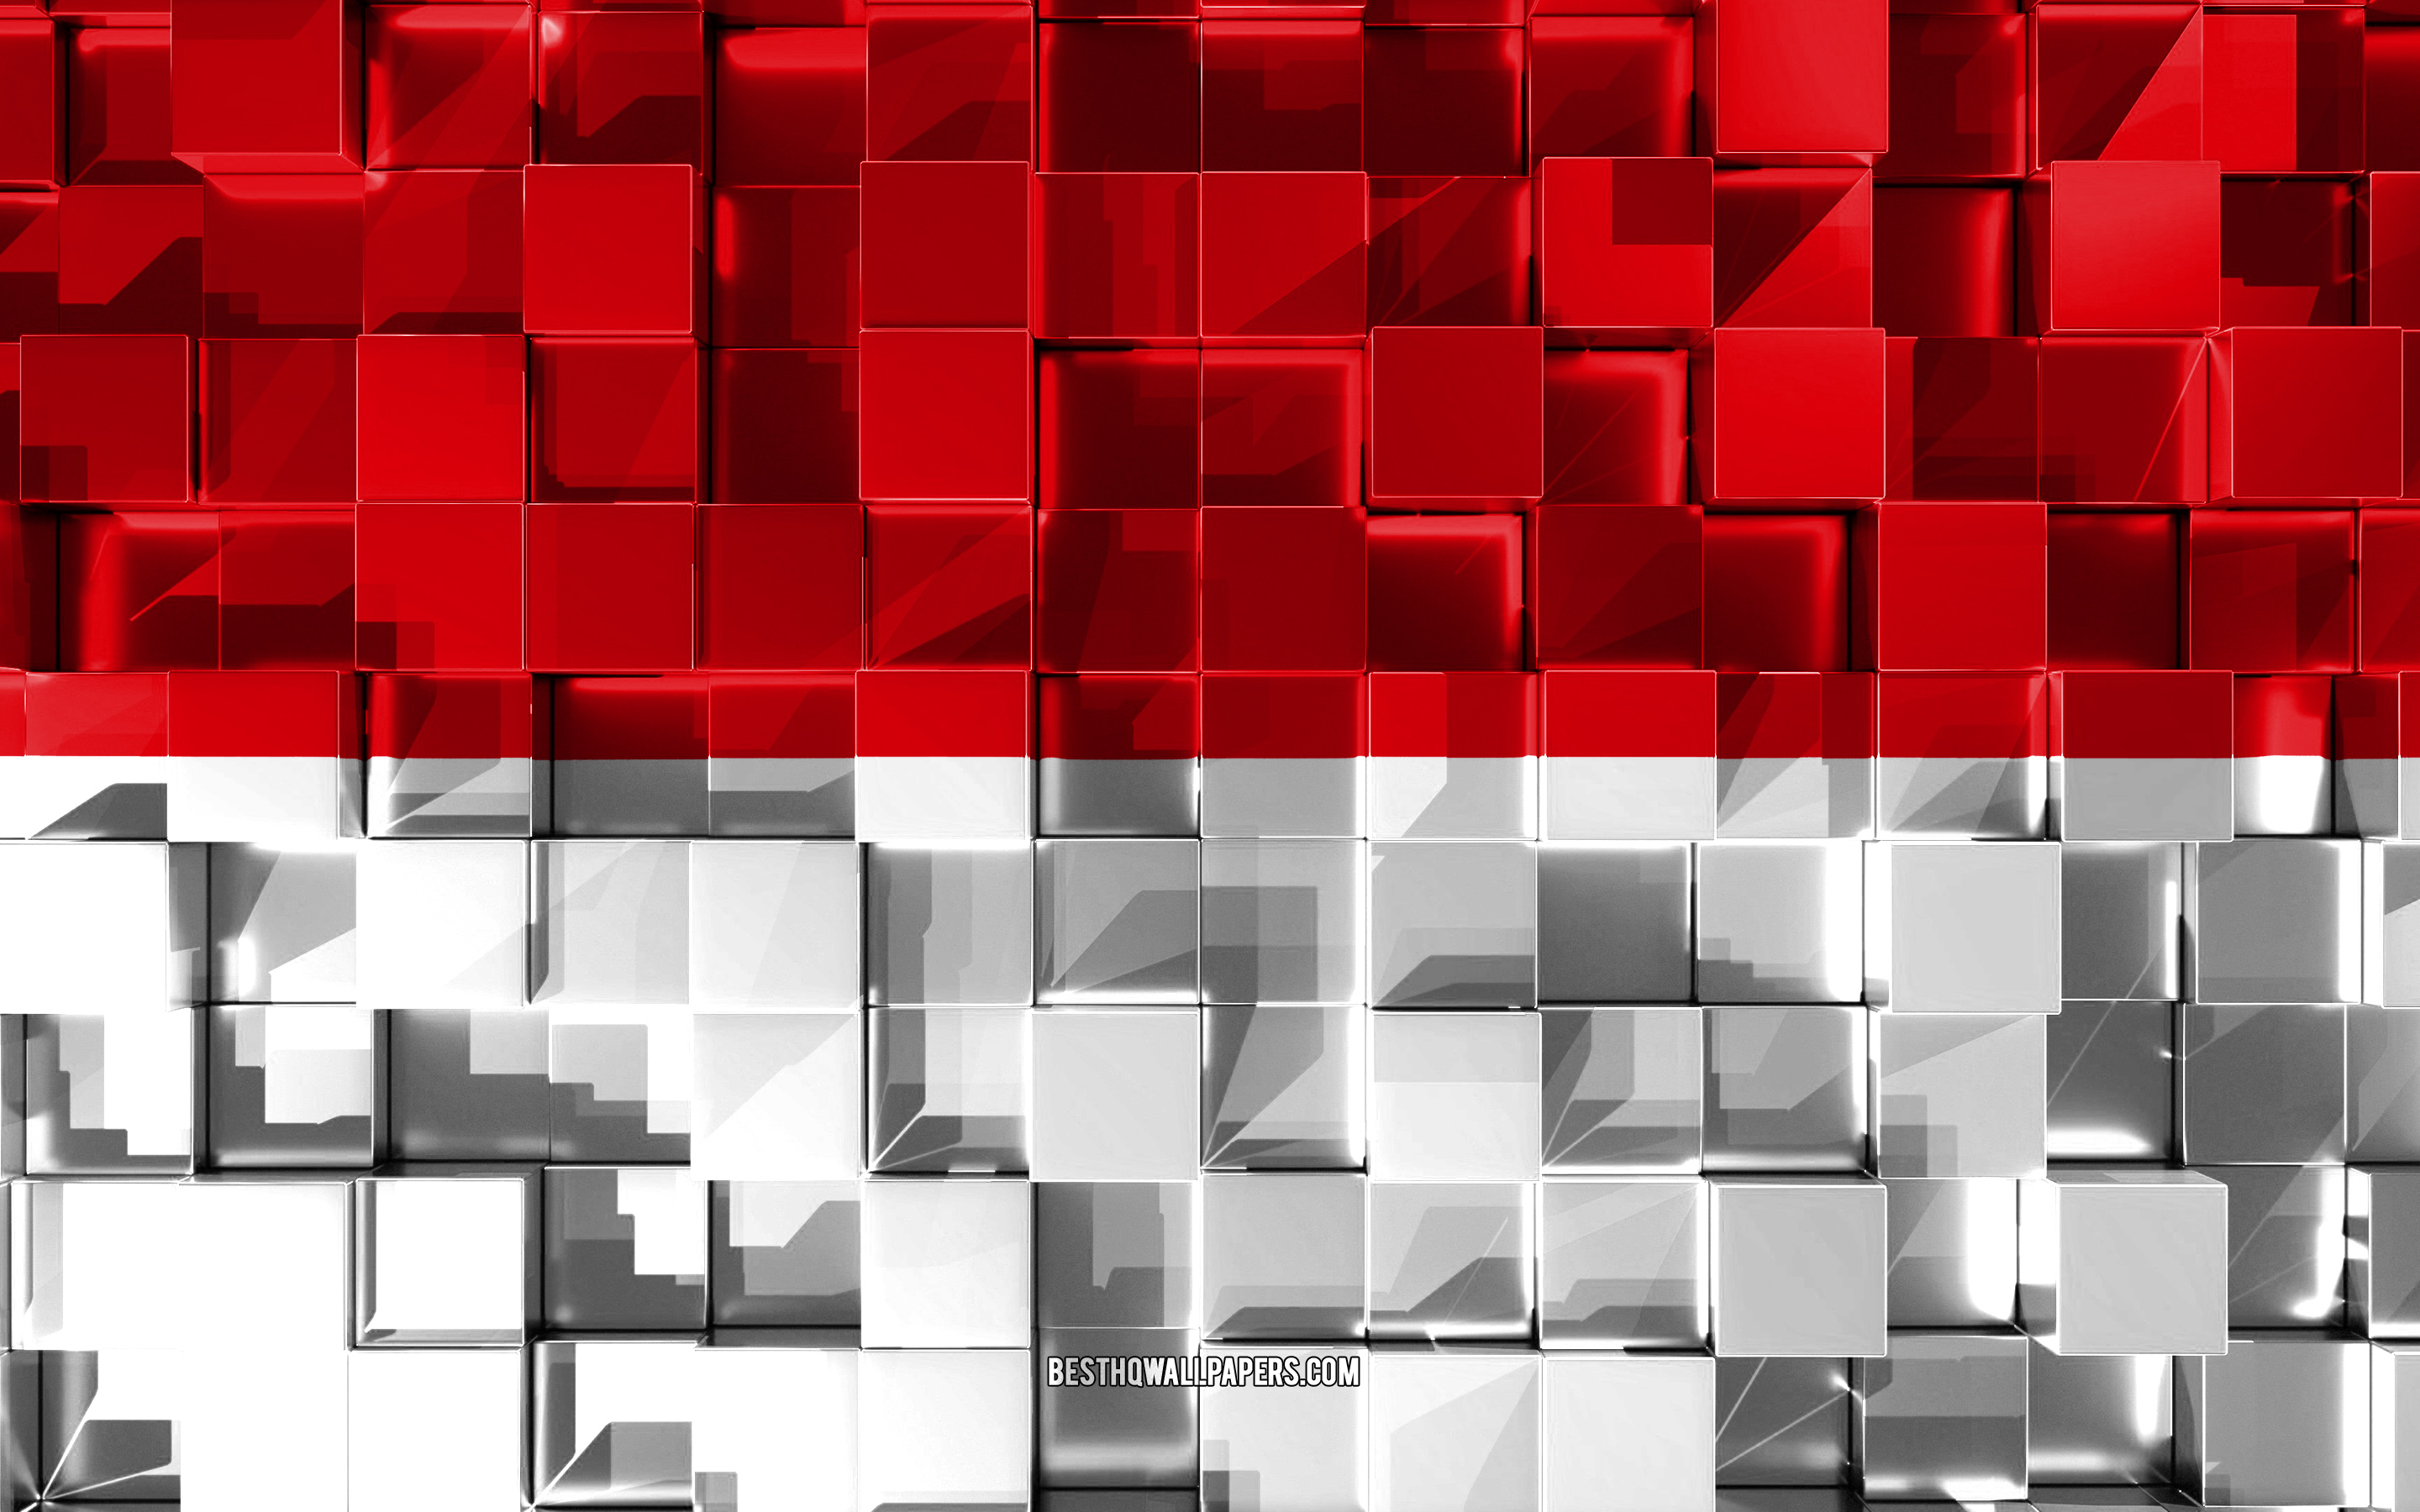 Download wallpaper Flag of Indonesia, 3D flag, 3D cubes texture, Flags of Asian countries, 3D art, Indonesia, Asia, 3D texture, Indonesia flag for desktop with resolution 2880x1800. High Quality HD picture wallpaper